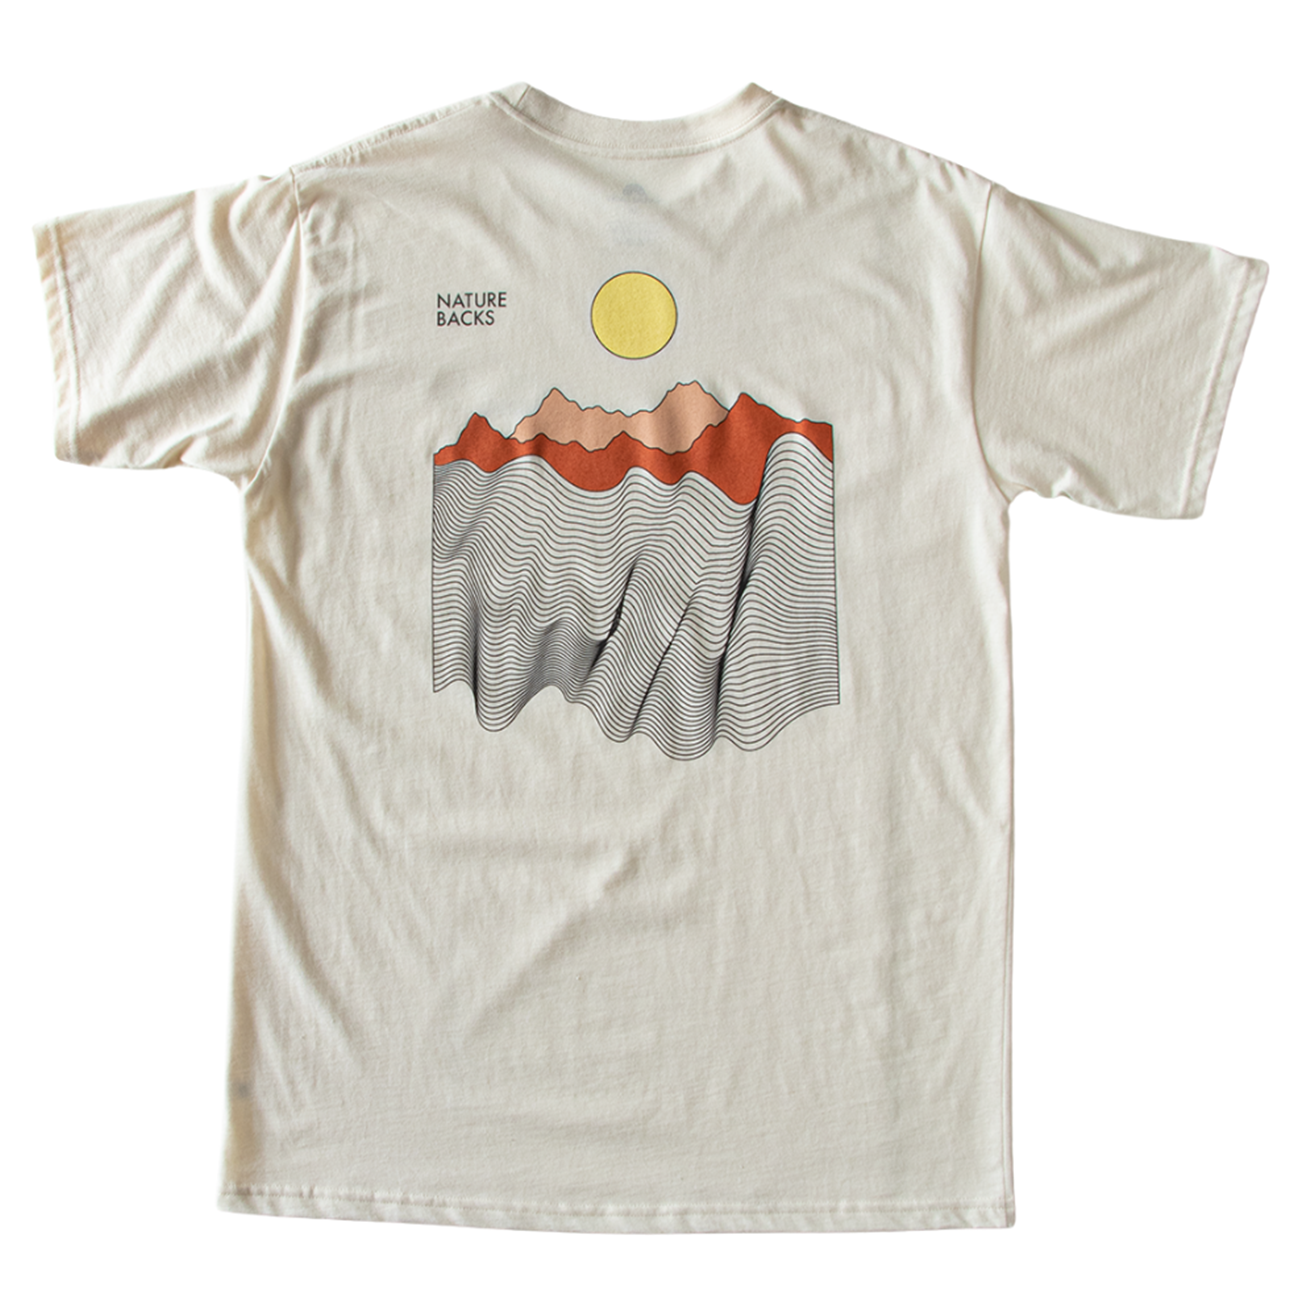 Nature Backs Limited Edition Short Sleeve 100% Organic Cotton T-Shirt | Limited Ebb and Flow Ivory Short Sleeve made with Eco-Friendly Fibers Sustainably made in the USA 